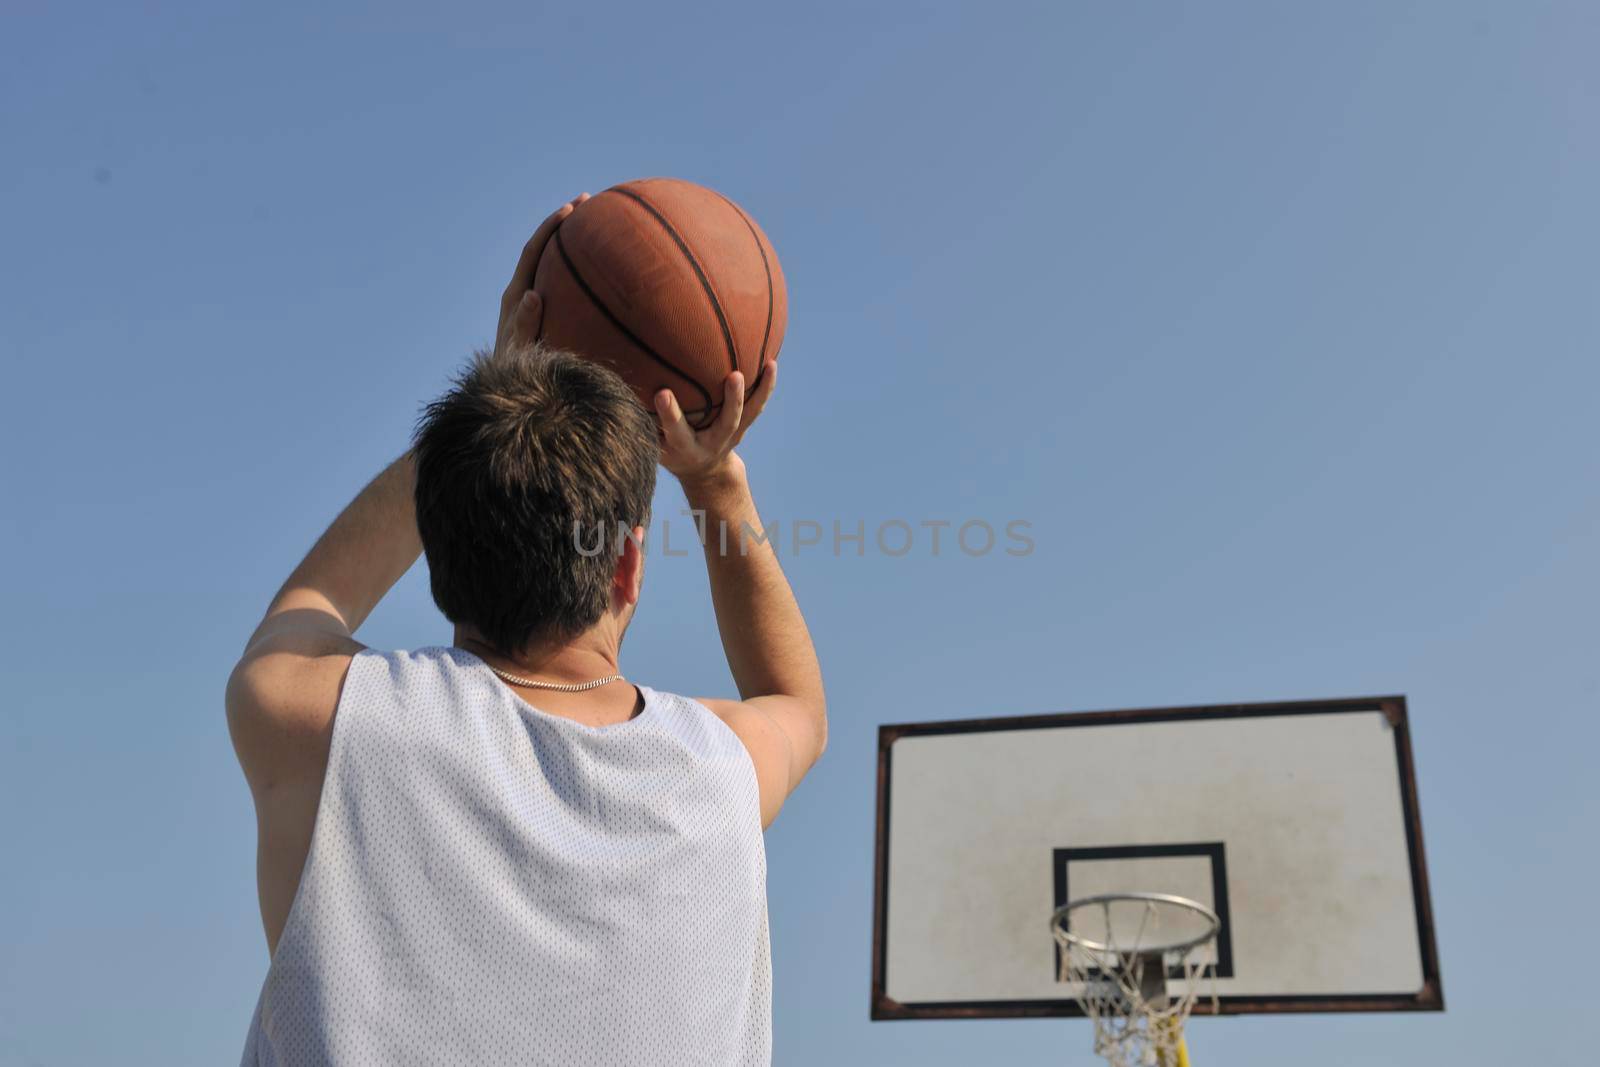 basketball player by dotshock